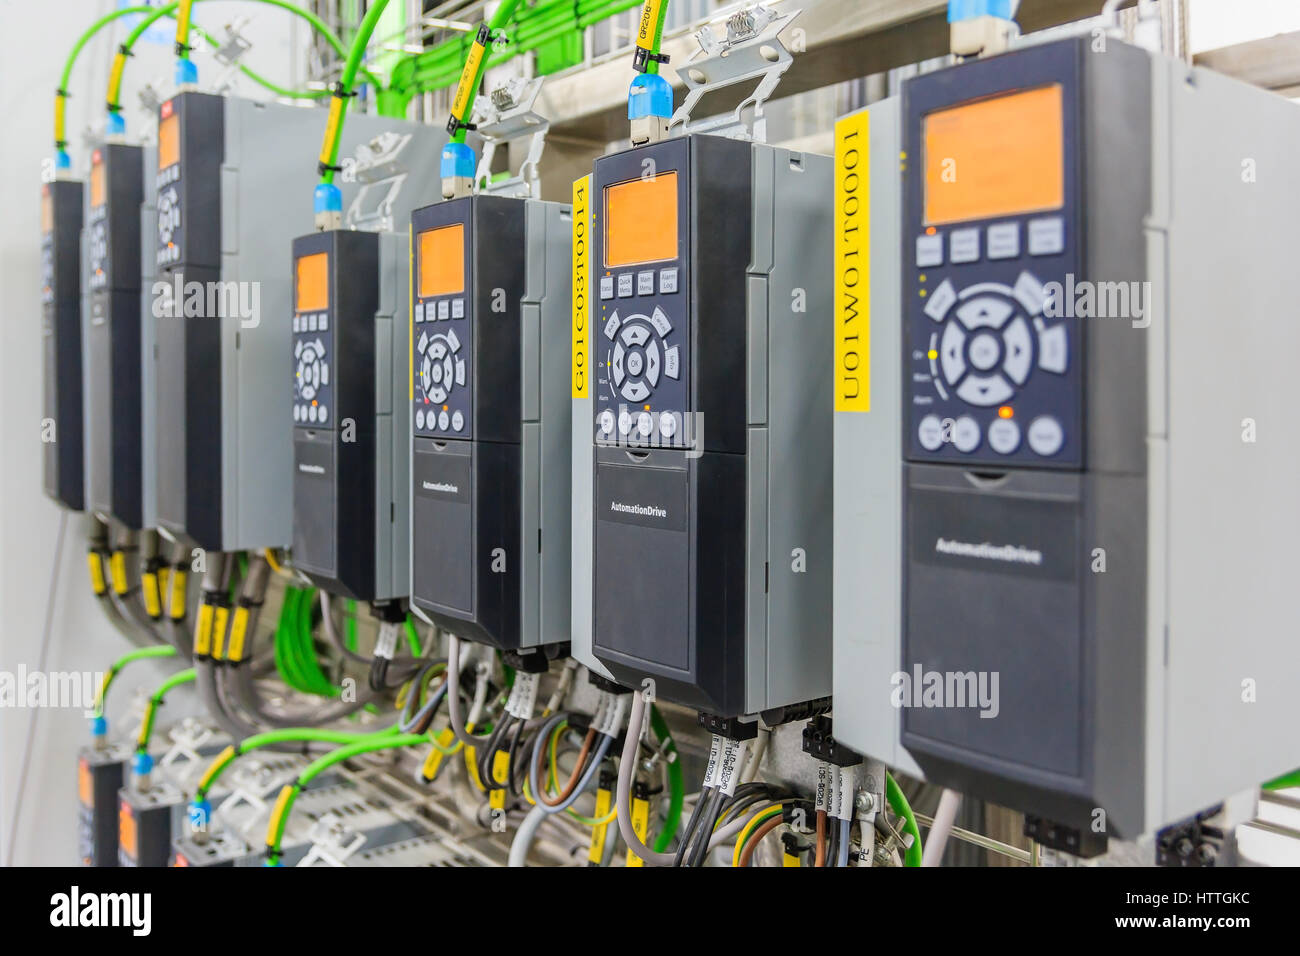 Electrical Drive Controlleranwendung in Industrie-Anlage Stockfoto